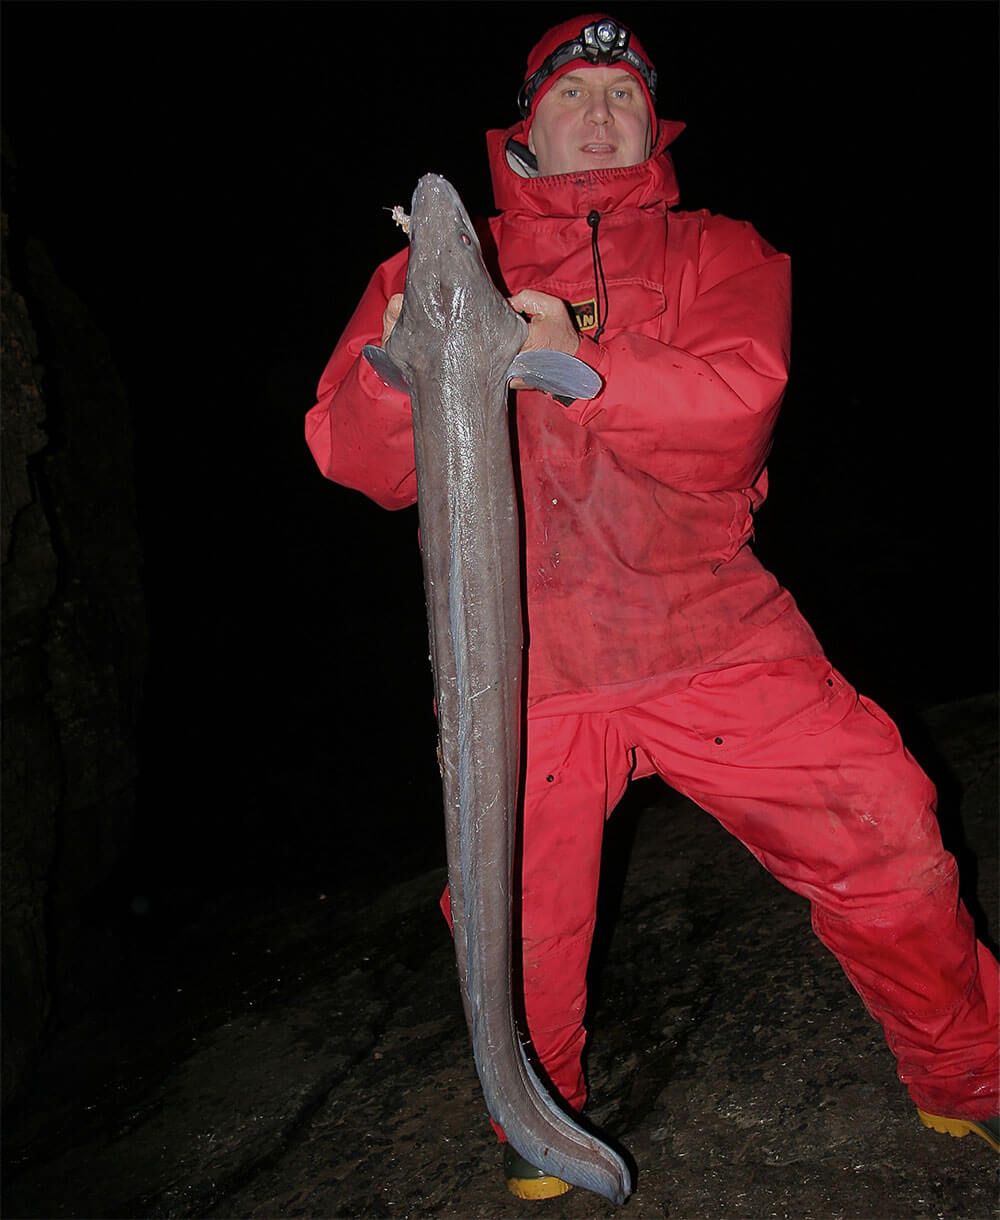 Dave Brooke with his 18lb conger eel